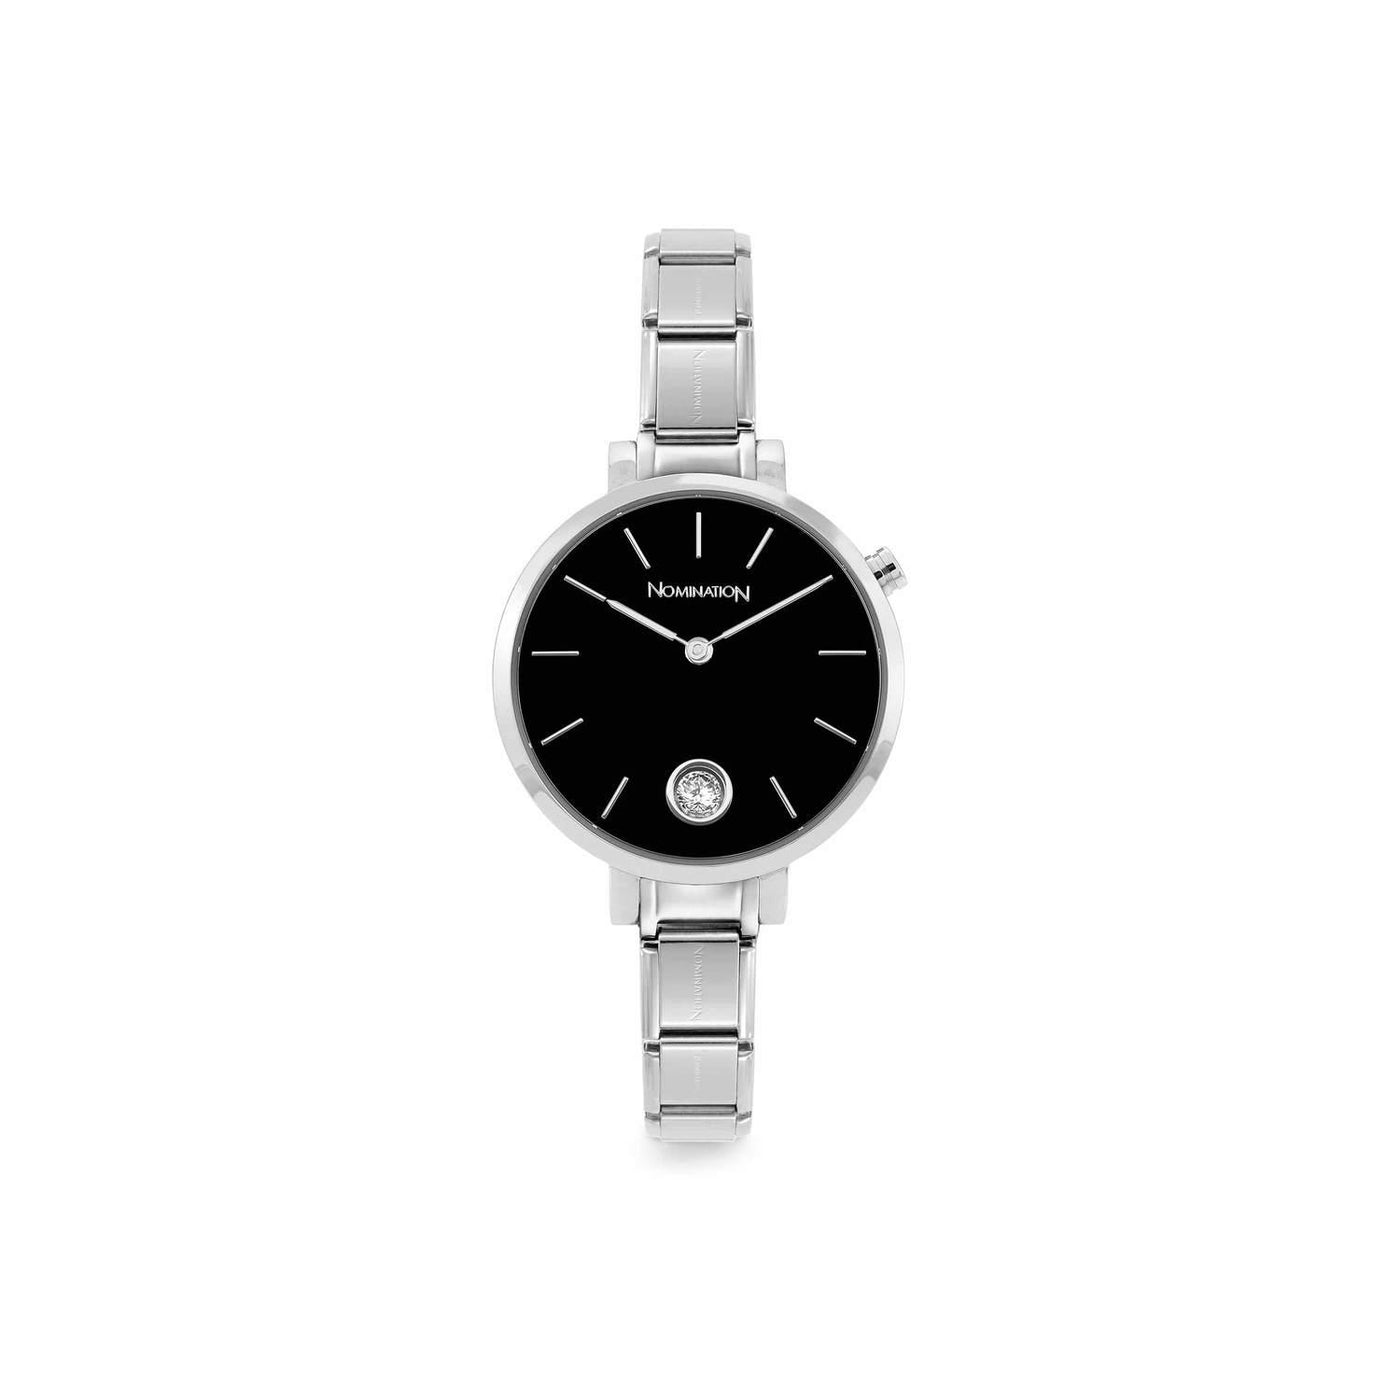 Nomination Silver and Black Cubic Zirconia Watch